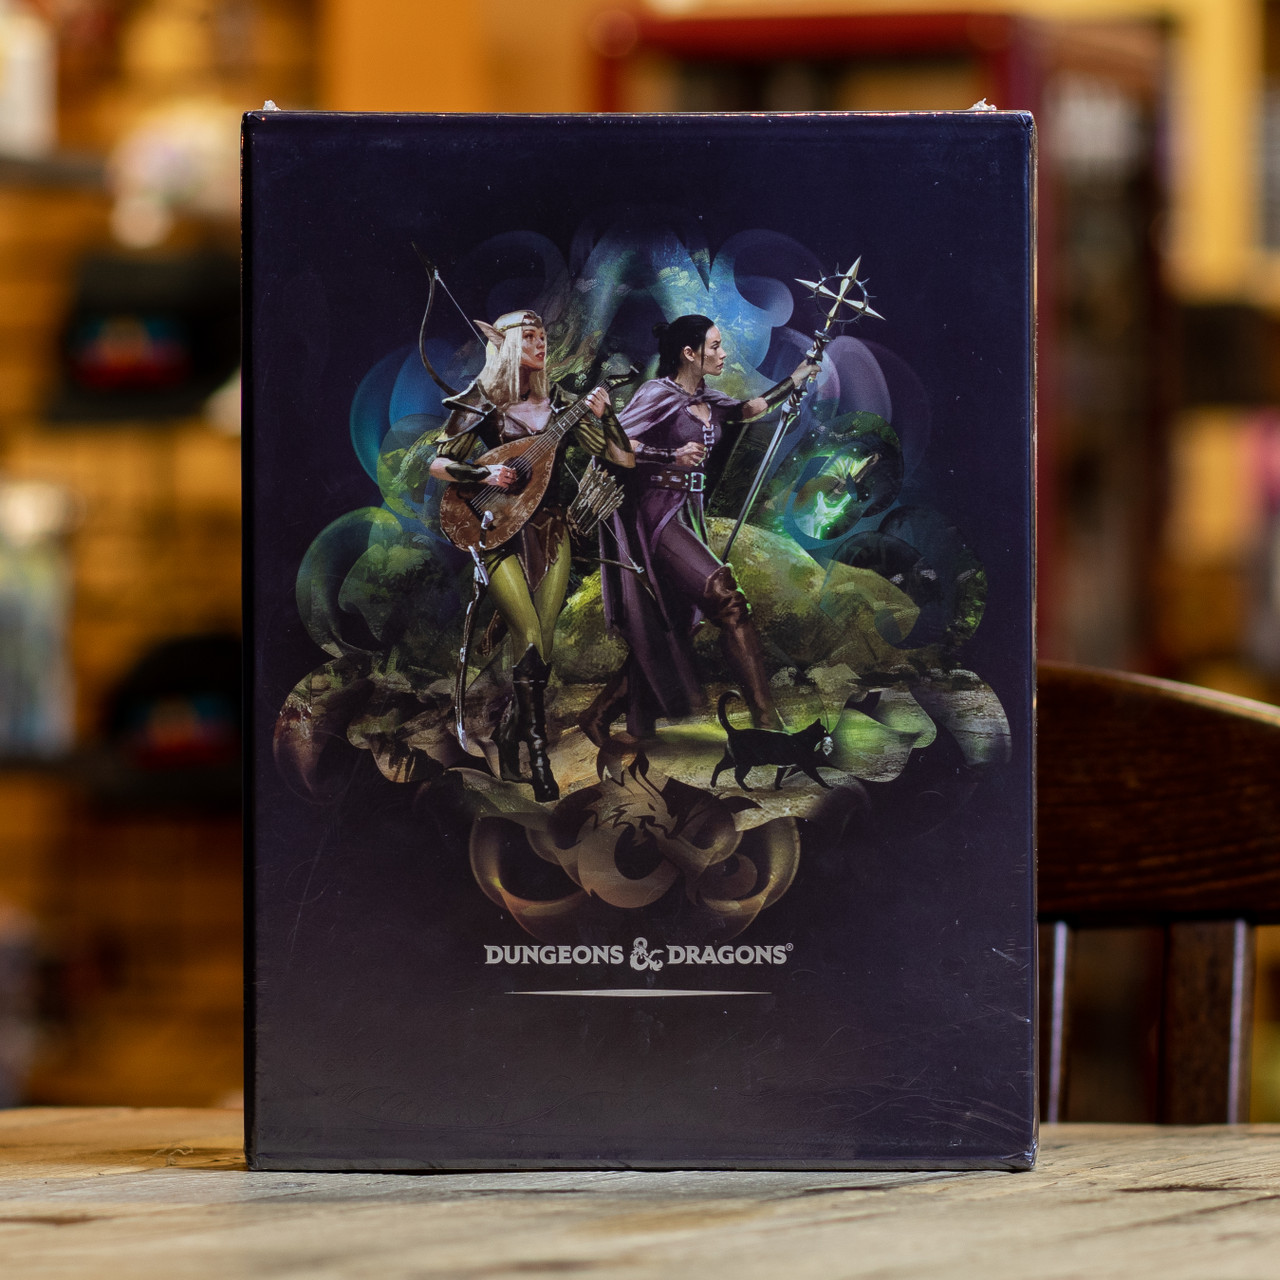 Dungeons & Dragons Rules Expansion Gift Set (D&D Books)-: Tasha's Cauldron  of Everything + Xanathar's Guide to Everything + Monsters of the Multiverse